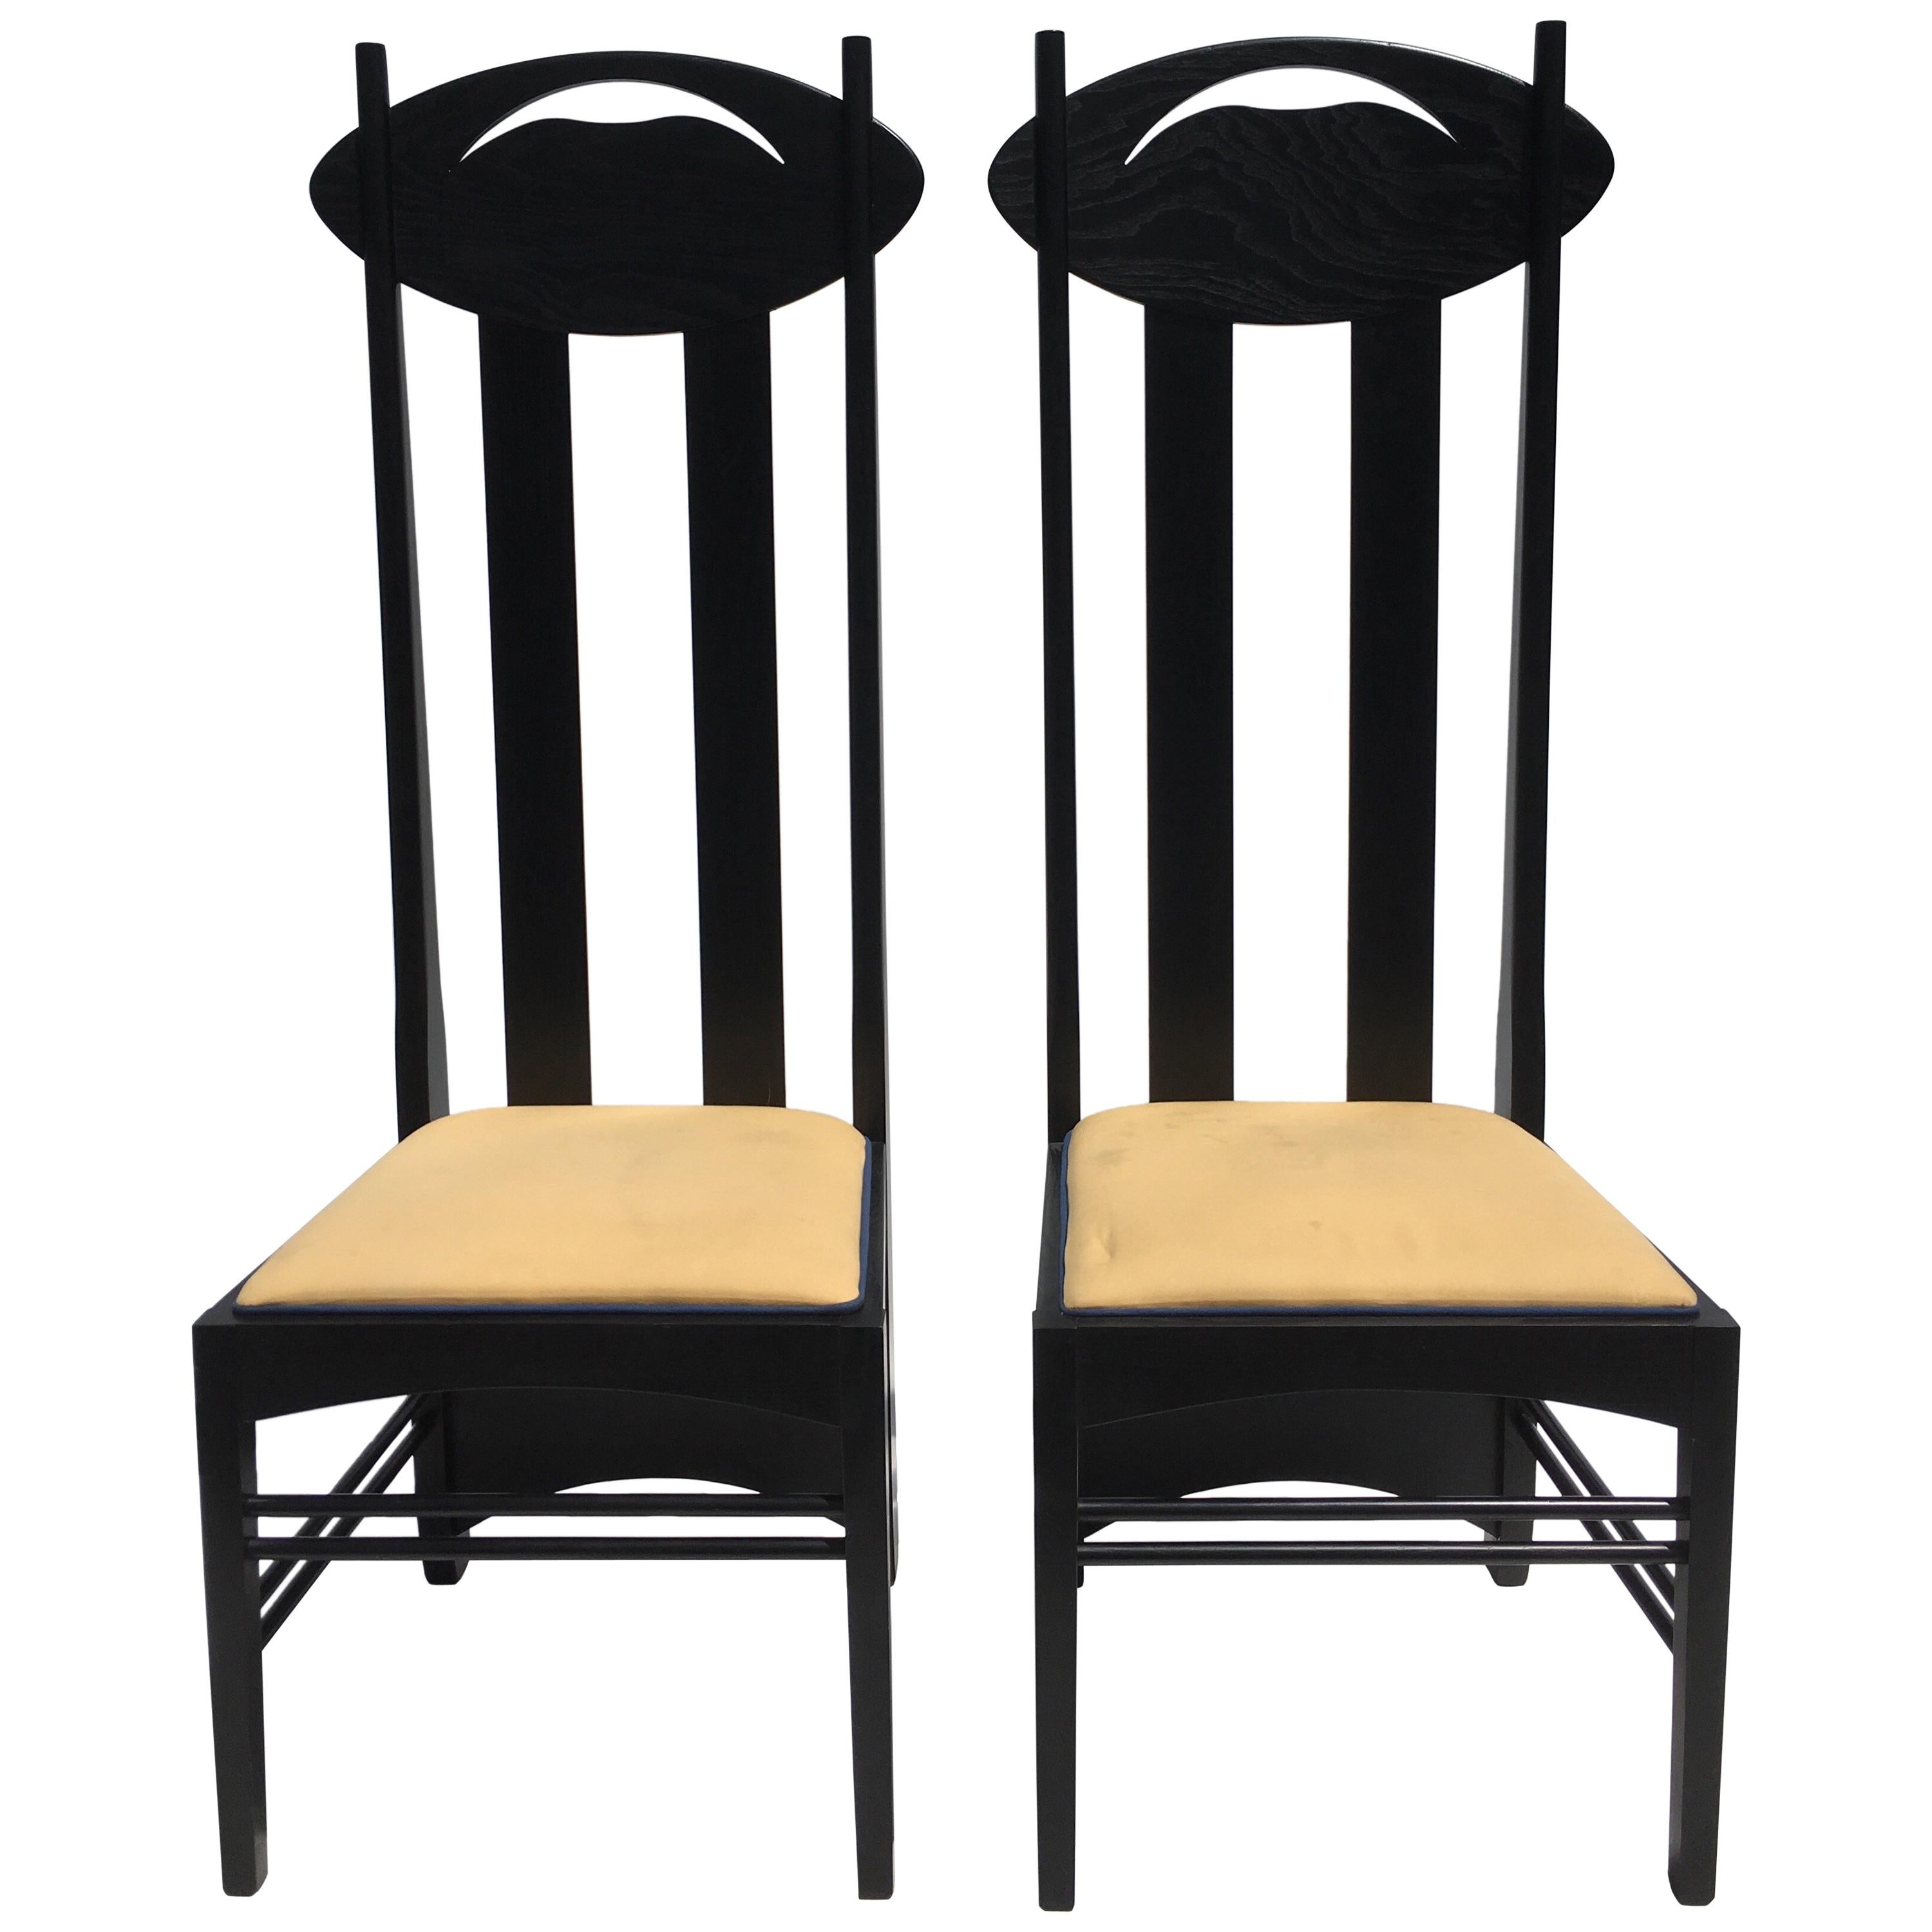 Two Charles Rennie Mackintosh Tall Back Chairs by Cassina